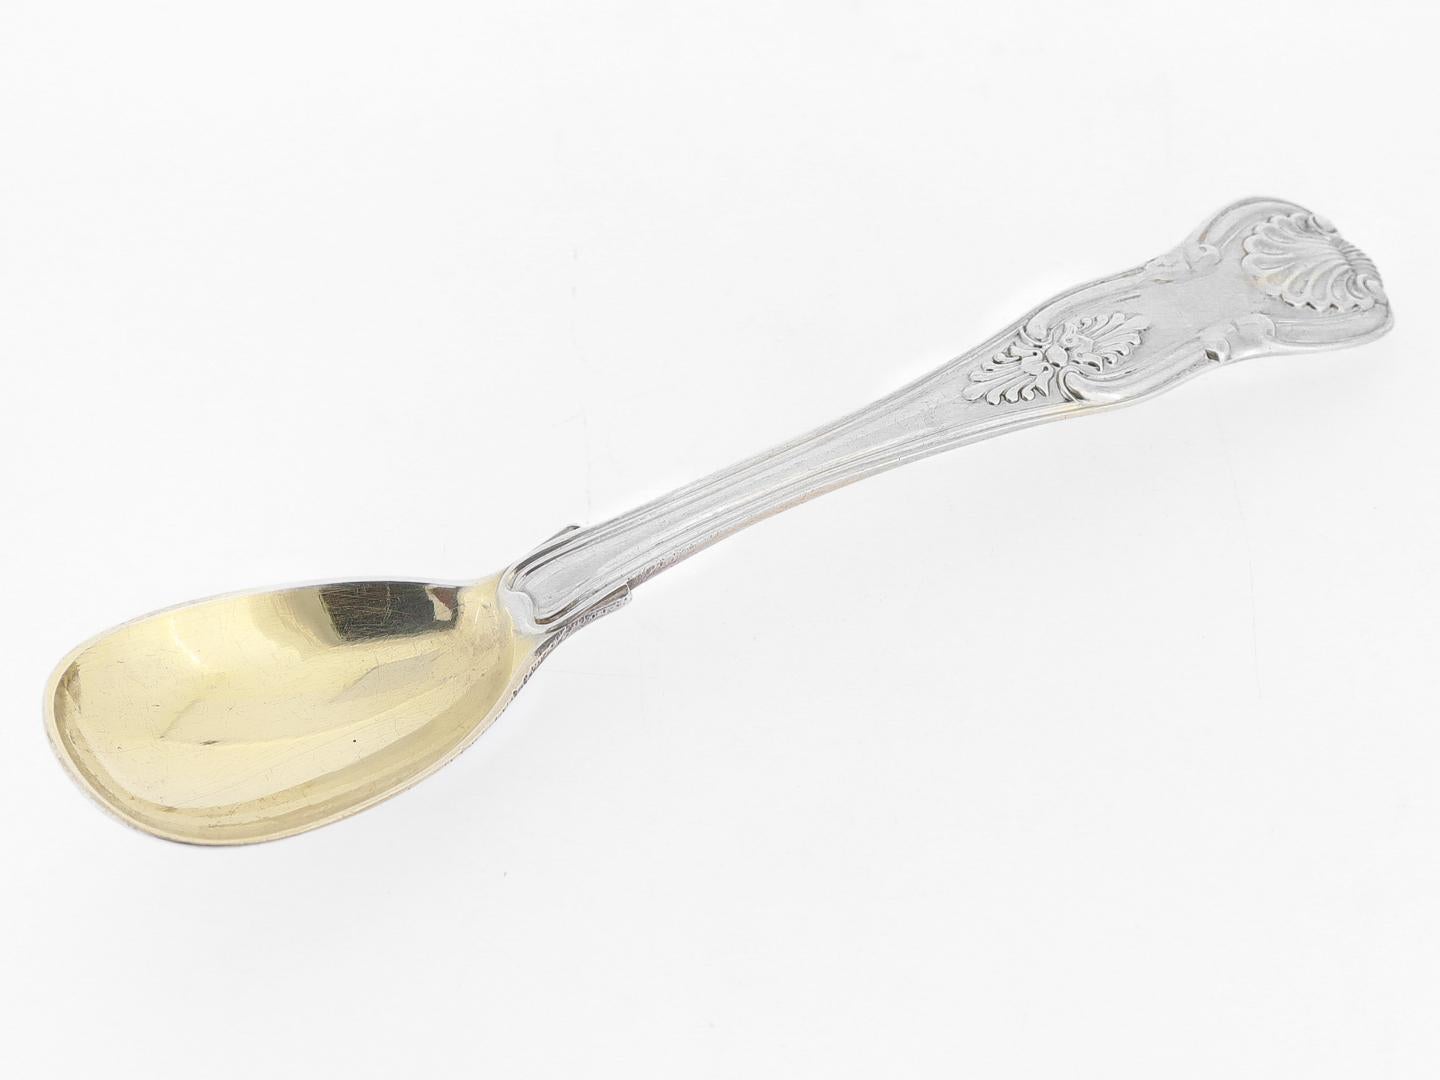  A fine antique English mustard spoon.

In sterling silver.

By William Chawner II or London.

In the Kings pattern.

Each with light gilding to the bowl.

Fully hallmarked to the reverse for sterling silver, London, WC for William Chawner II, and